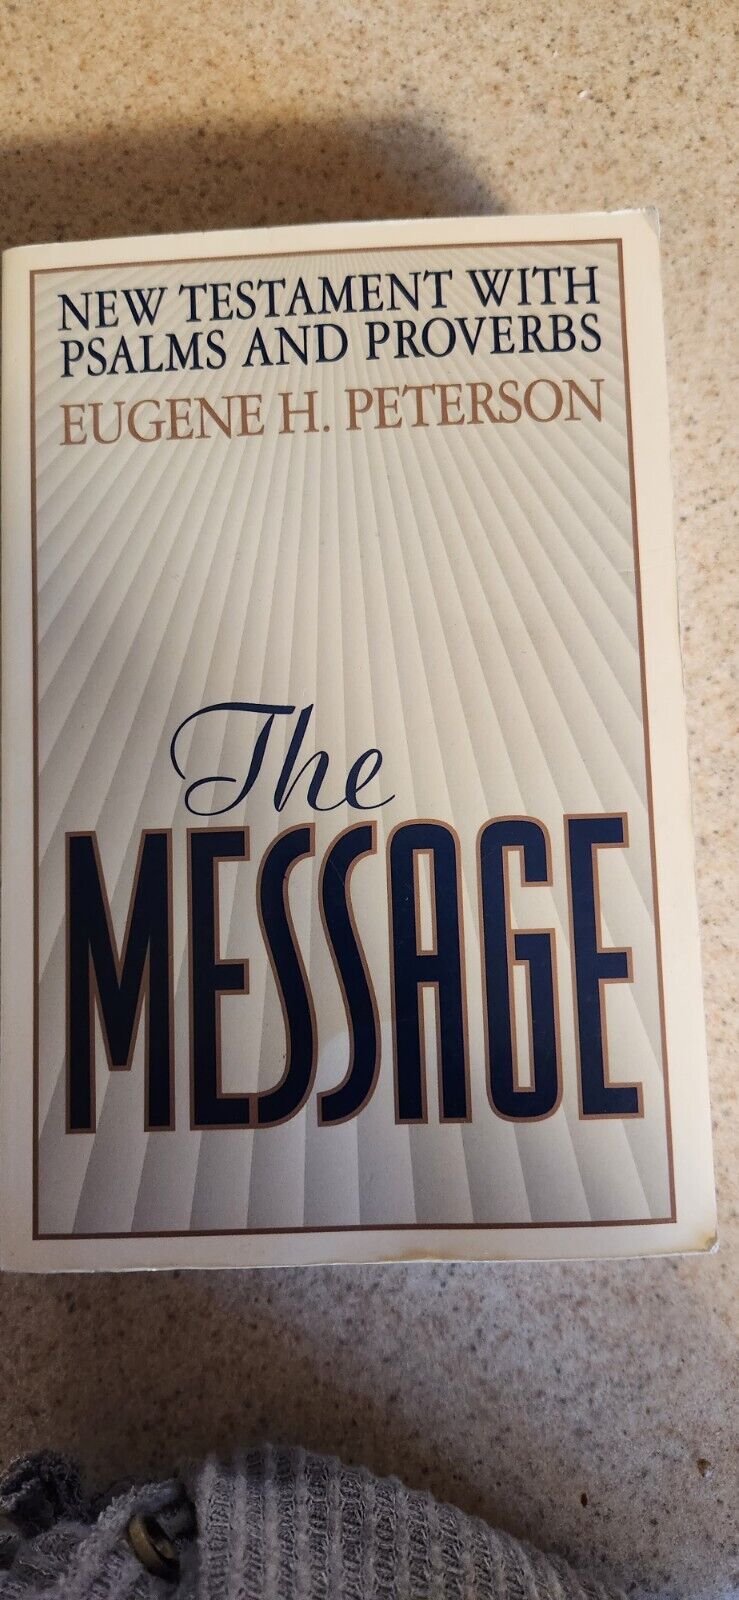 The Message Bible Eugene Peterson 1993 Paperback Holy Bible. NEW TESTAMENT